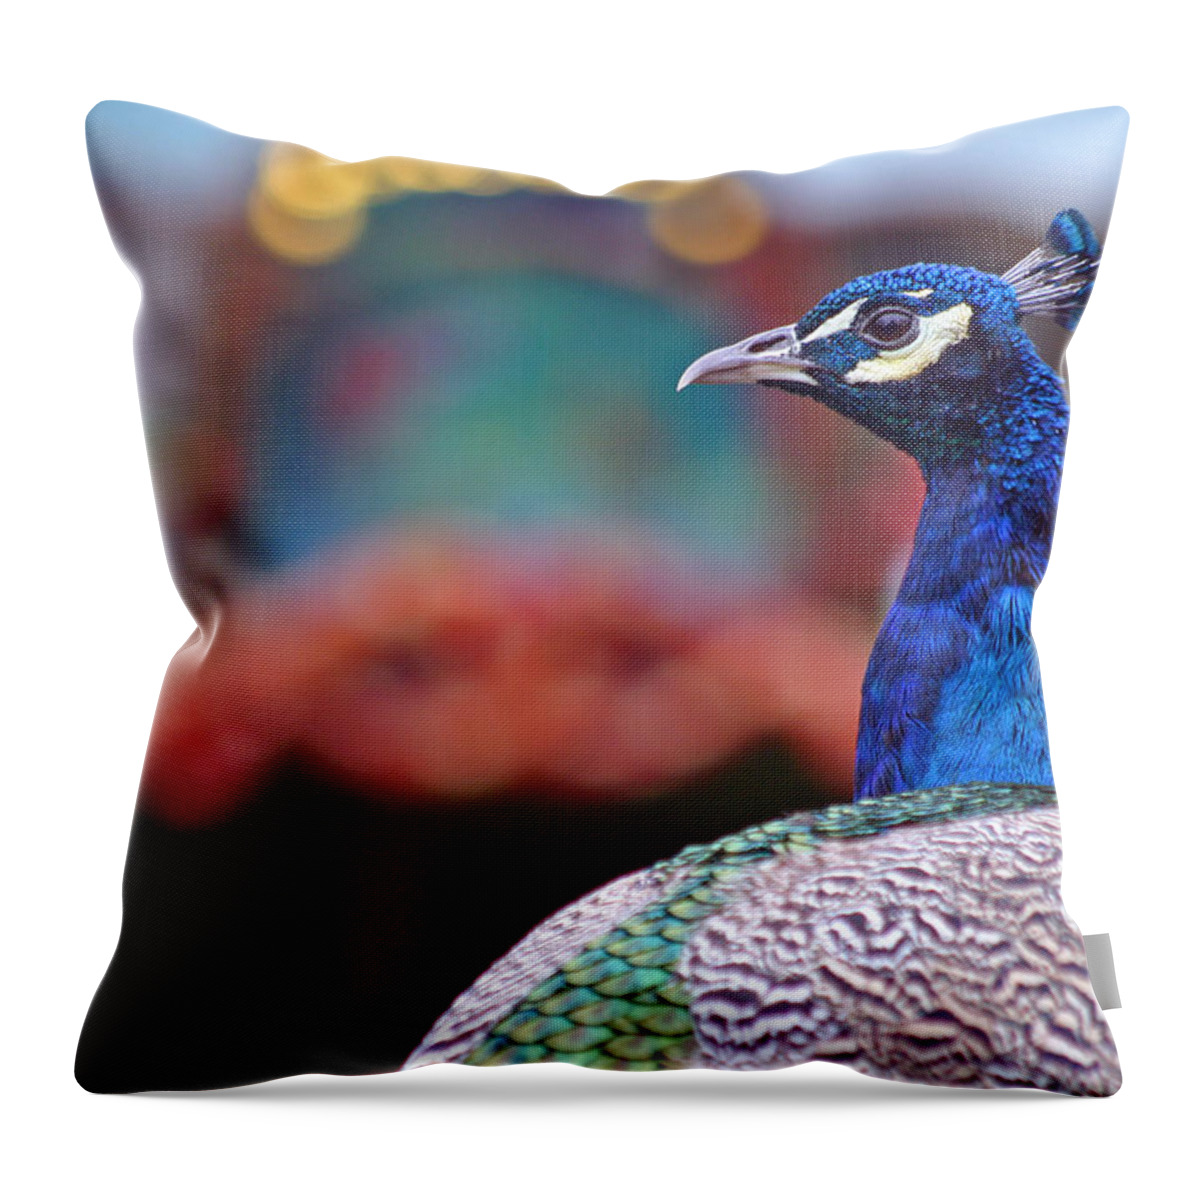 Zoo Throw Pillow featuring the photograph Peacock and Carousel by David Rucker